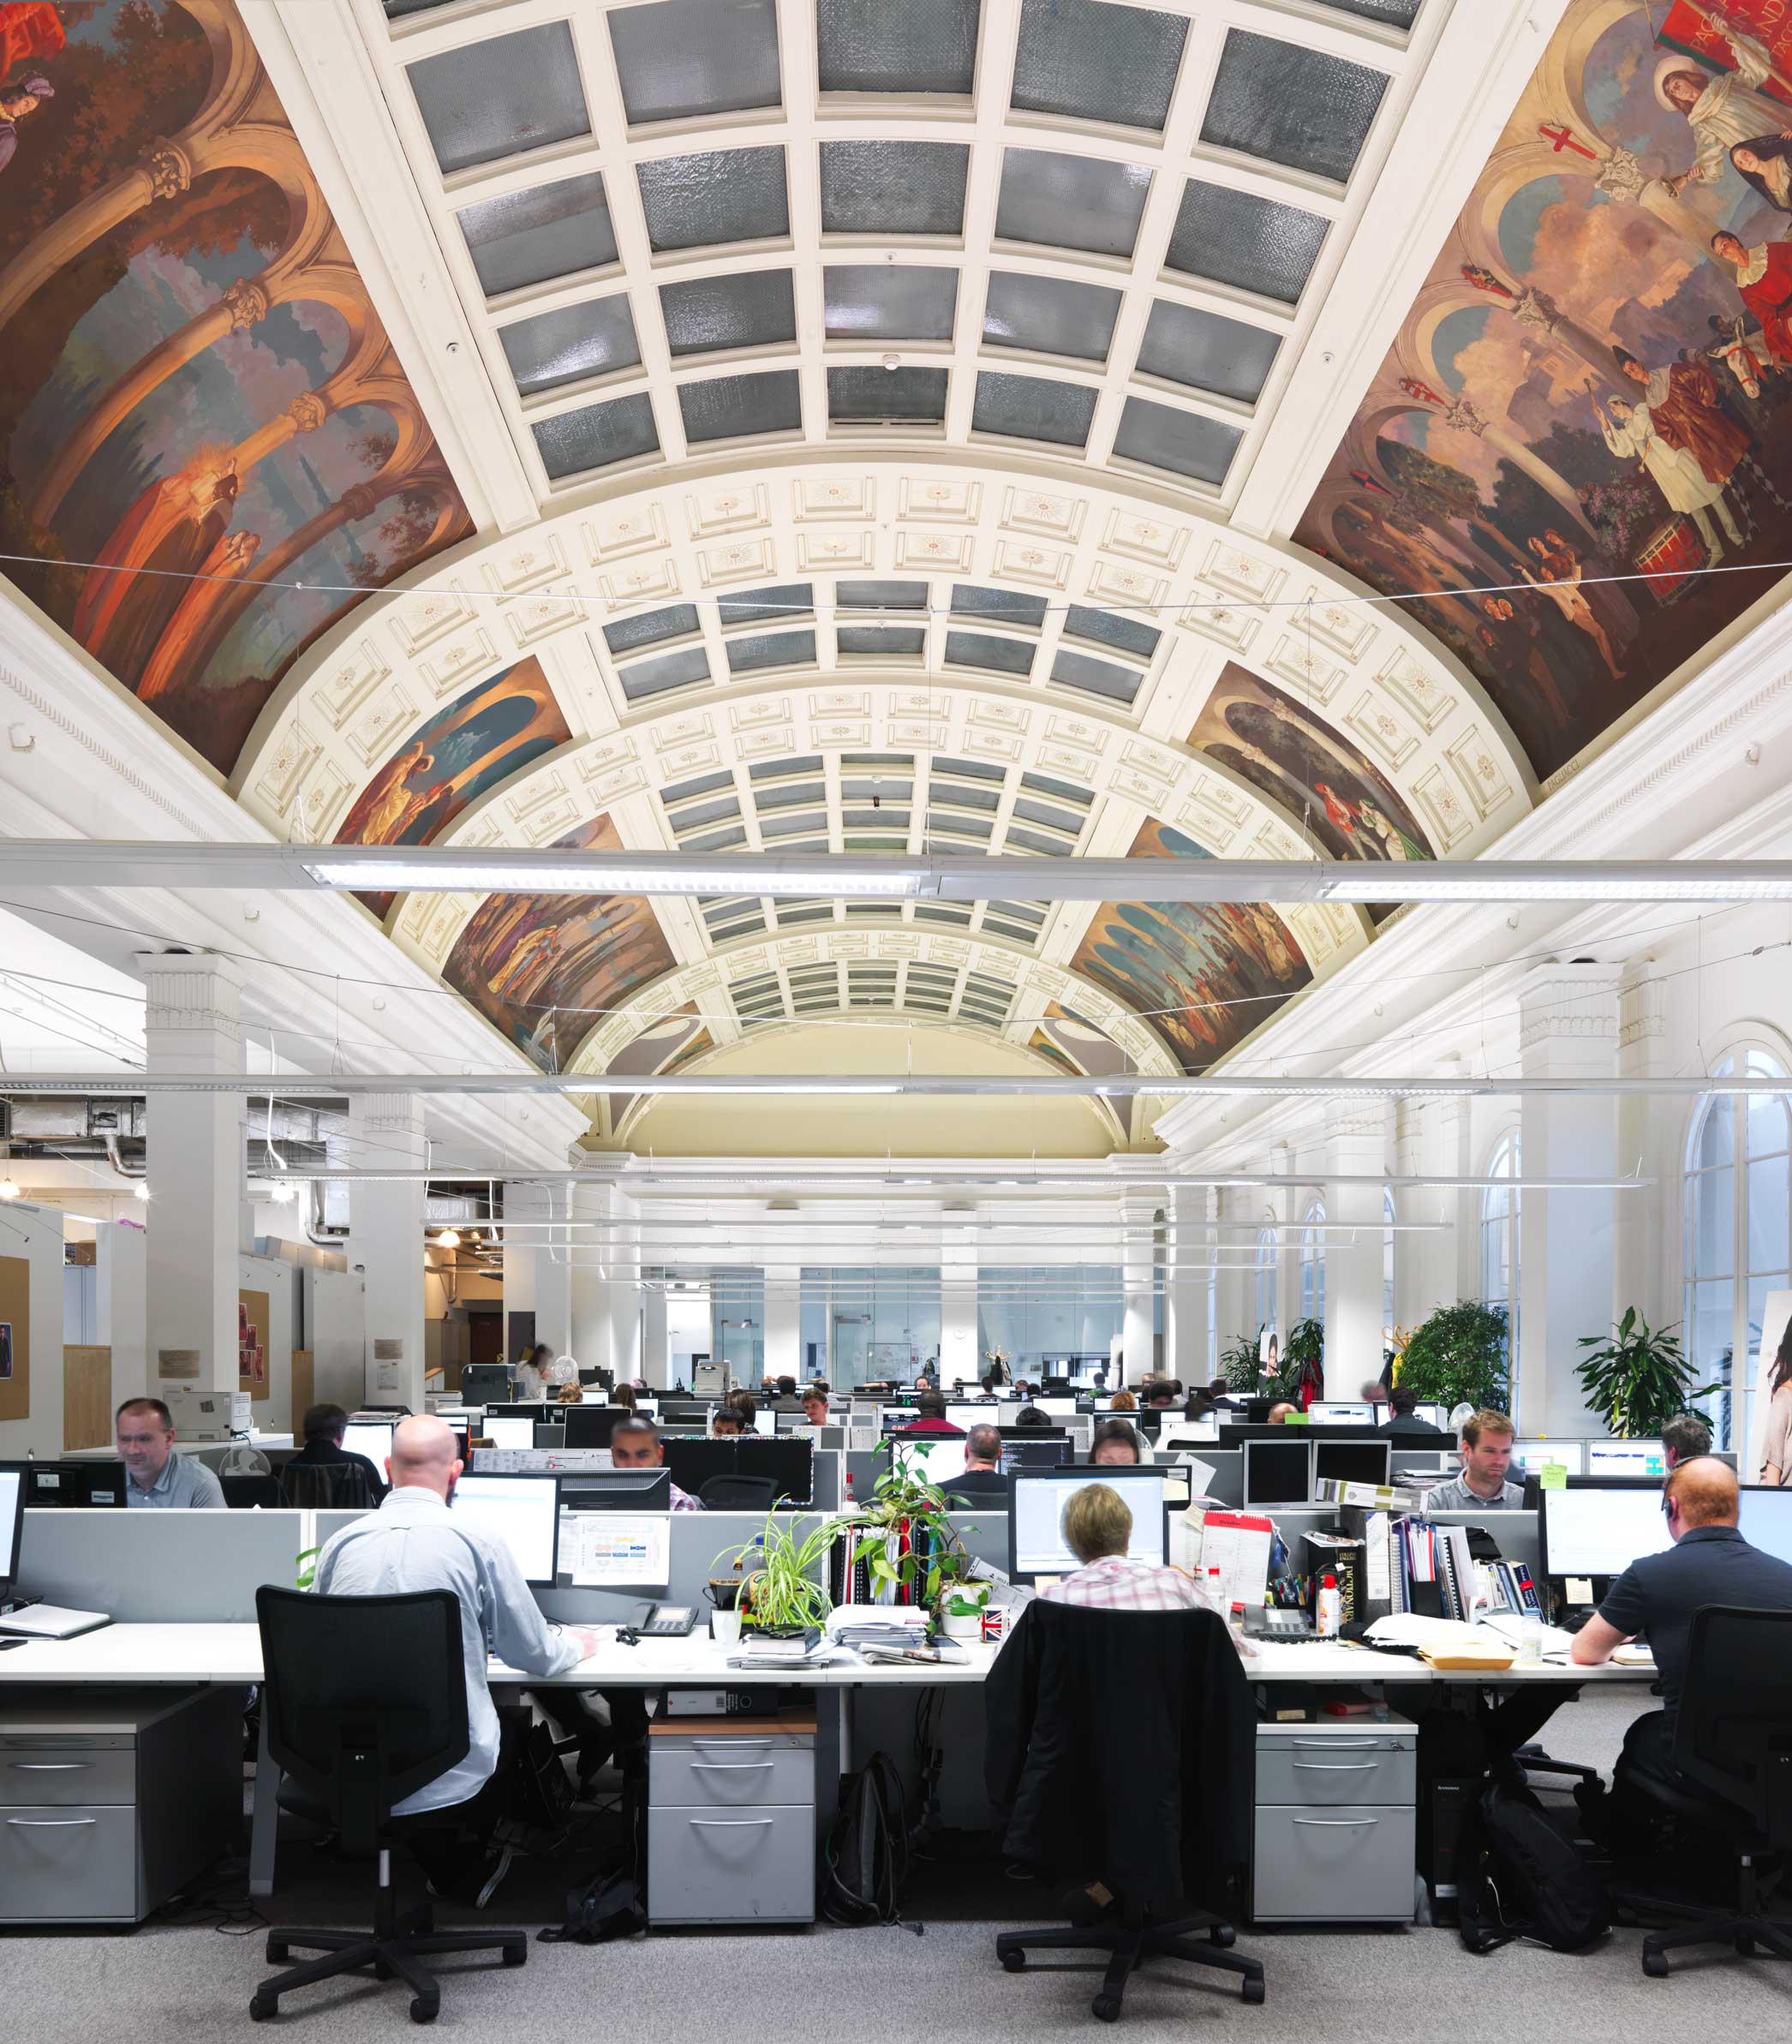 People working in an IT office with an elaborate historic ceiling.